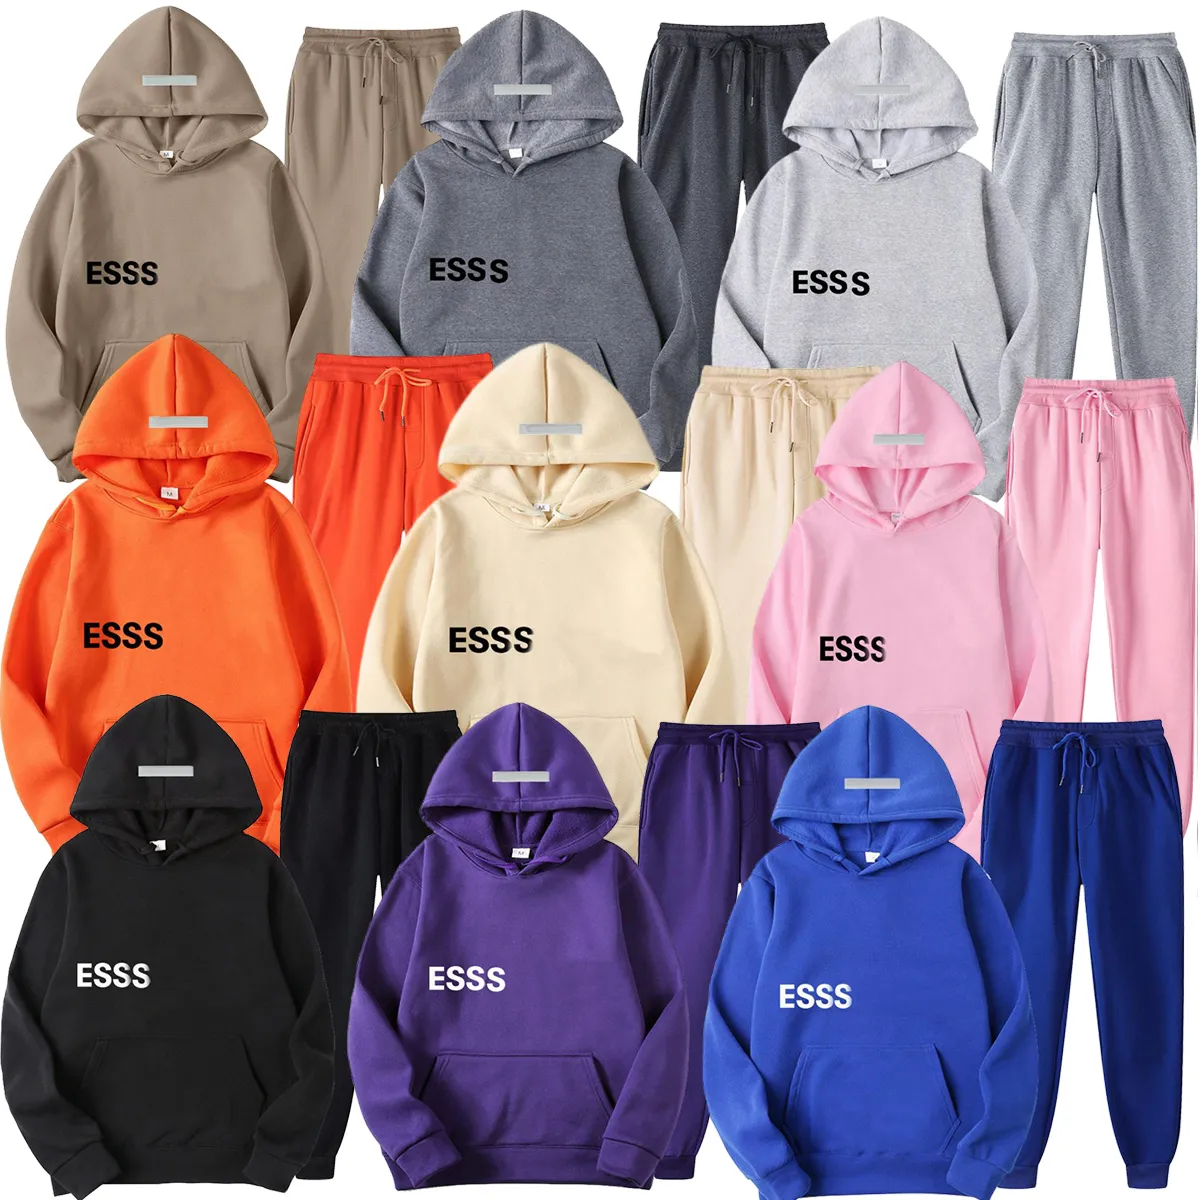 Mens Tracksuits Designer Track Sweat Suit Letter Print Hoodie Casual Pollover Sweatsuits Hommes Joggers Suits Autumn/Winter Hooded Sportswear Long Pants Outfits